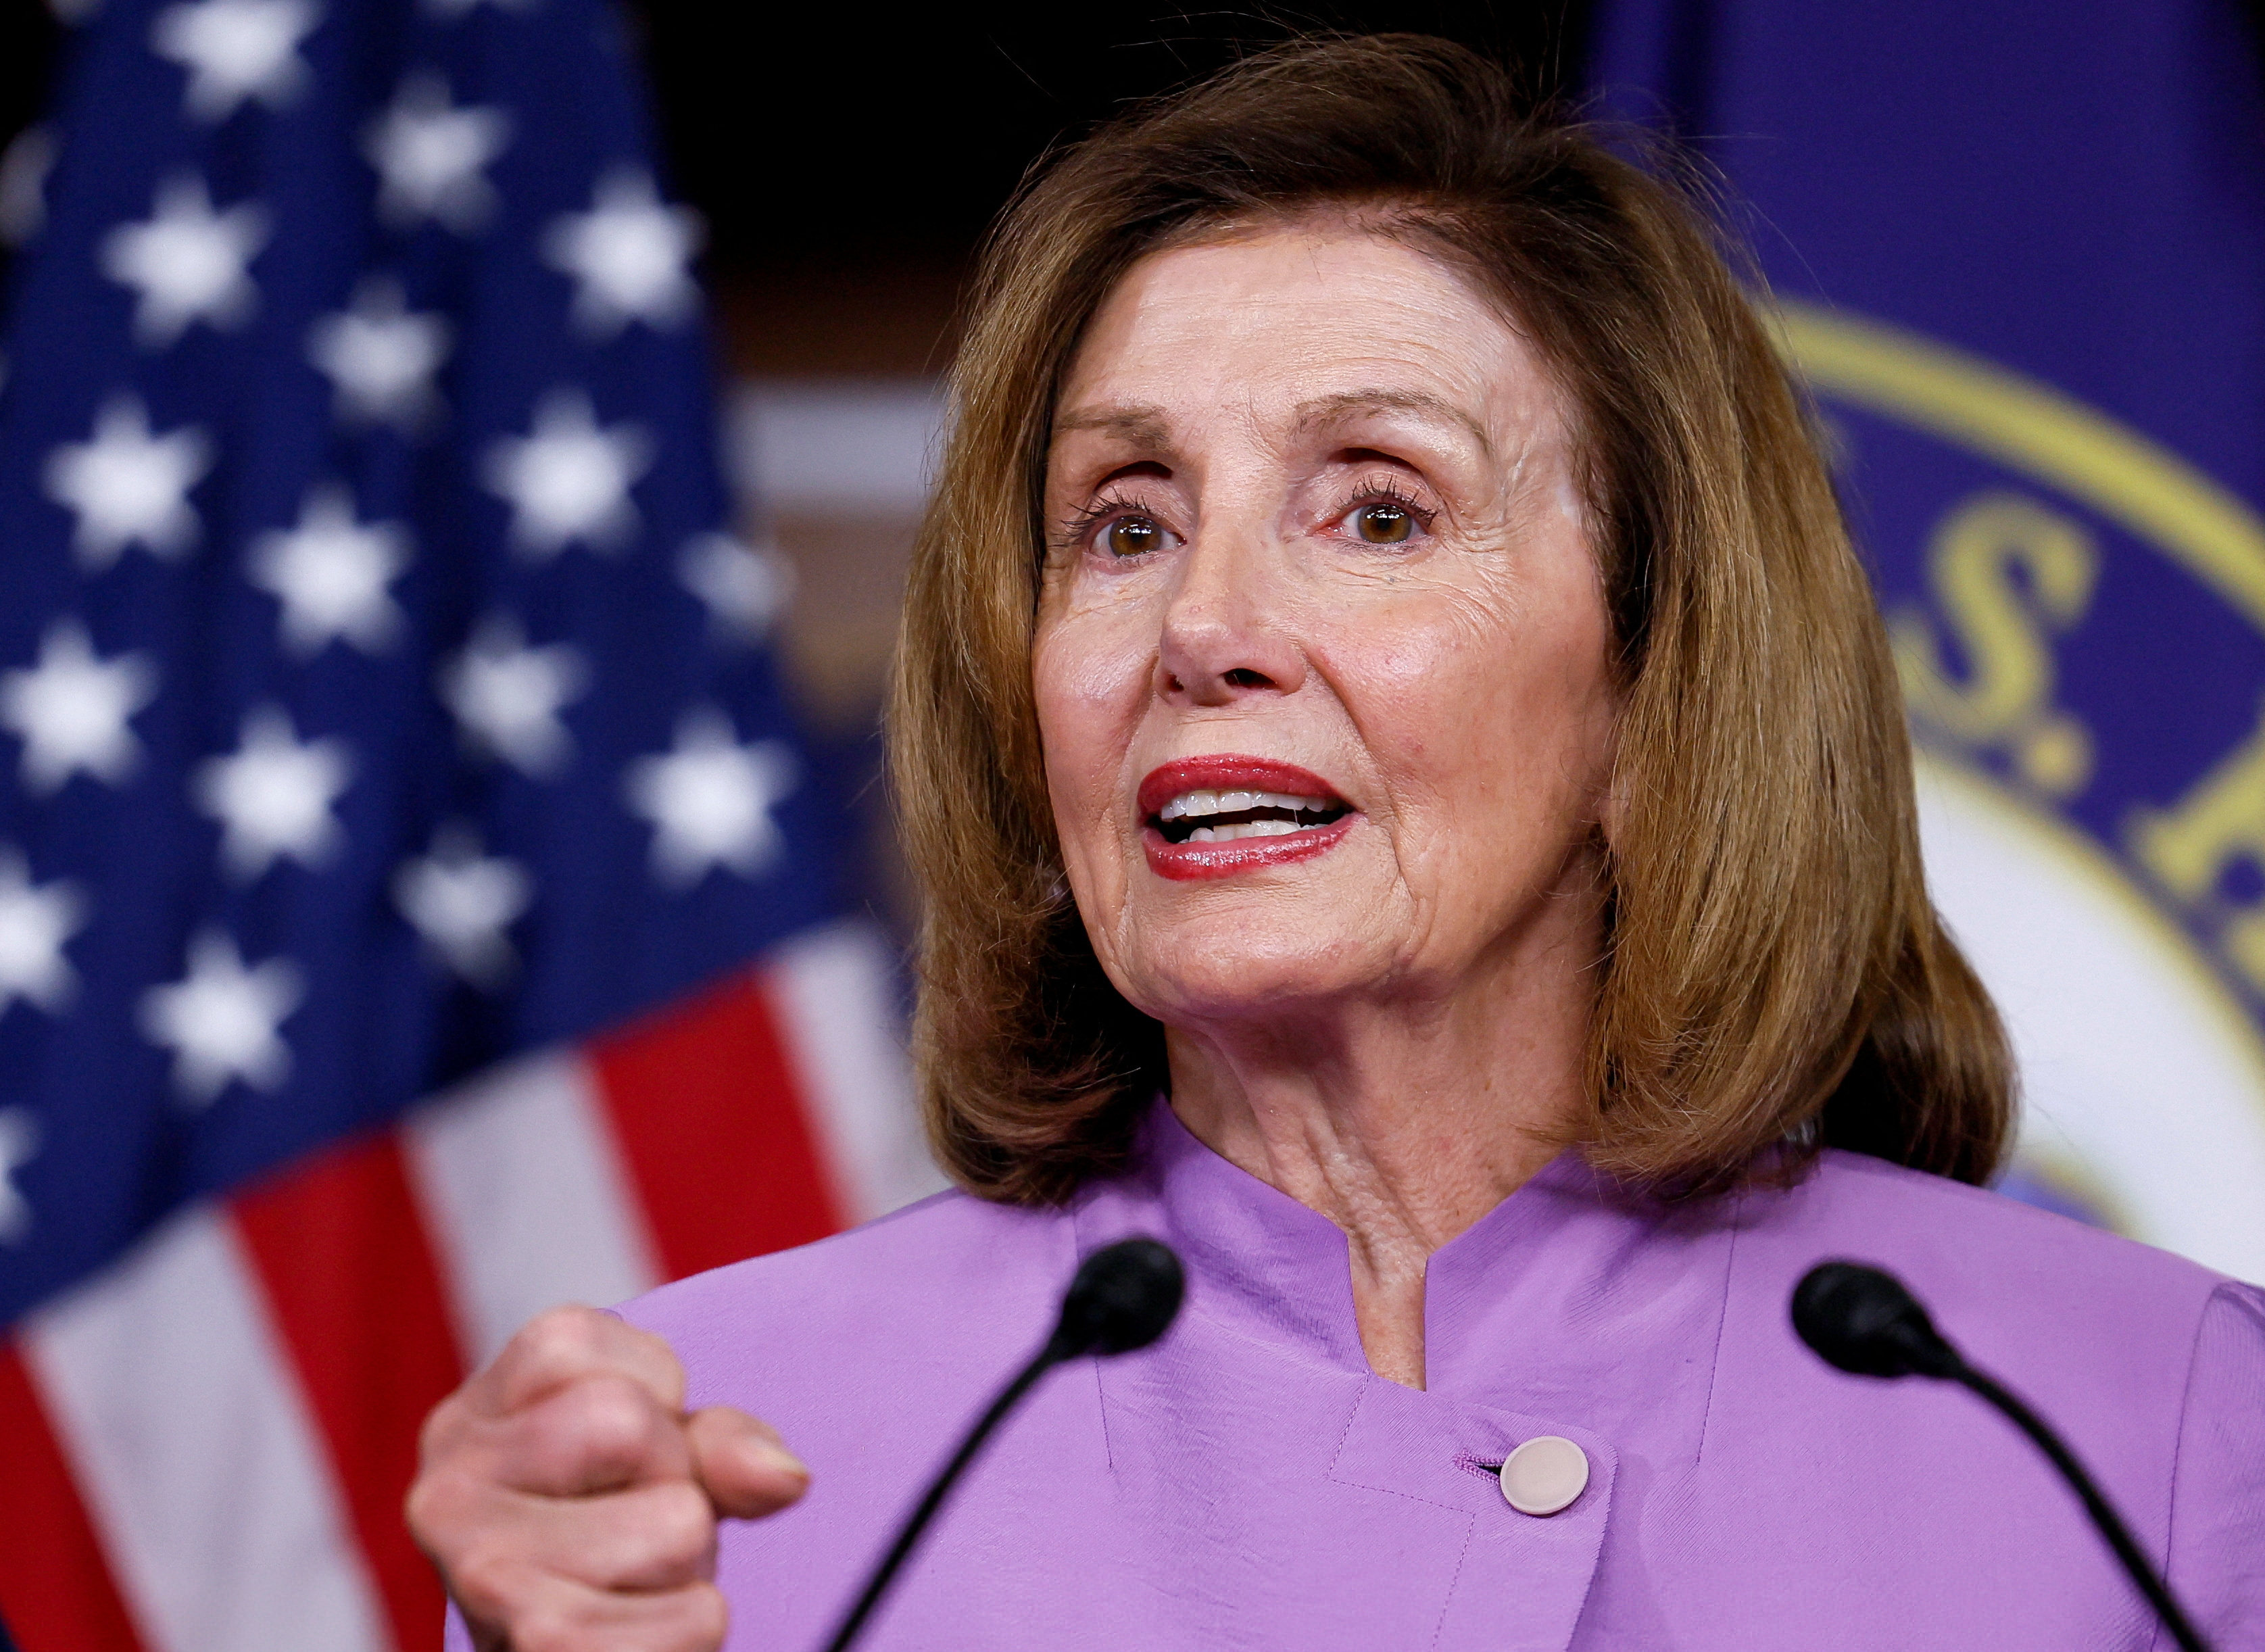 US House Speaker Nancy Pelosi, Democrat of California, during a news conference on Wednesday about her recent trip to the Indo-Pacific that included a stop in Taiwan. Photo: Reuters